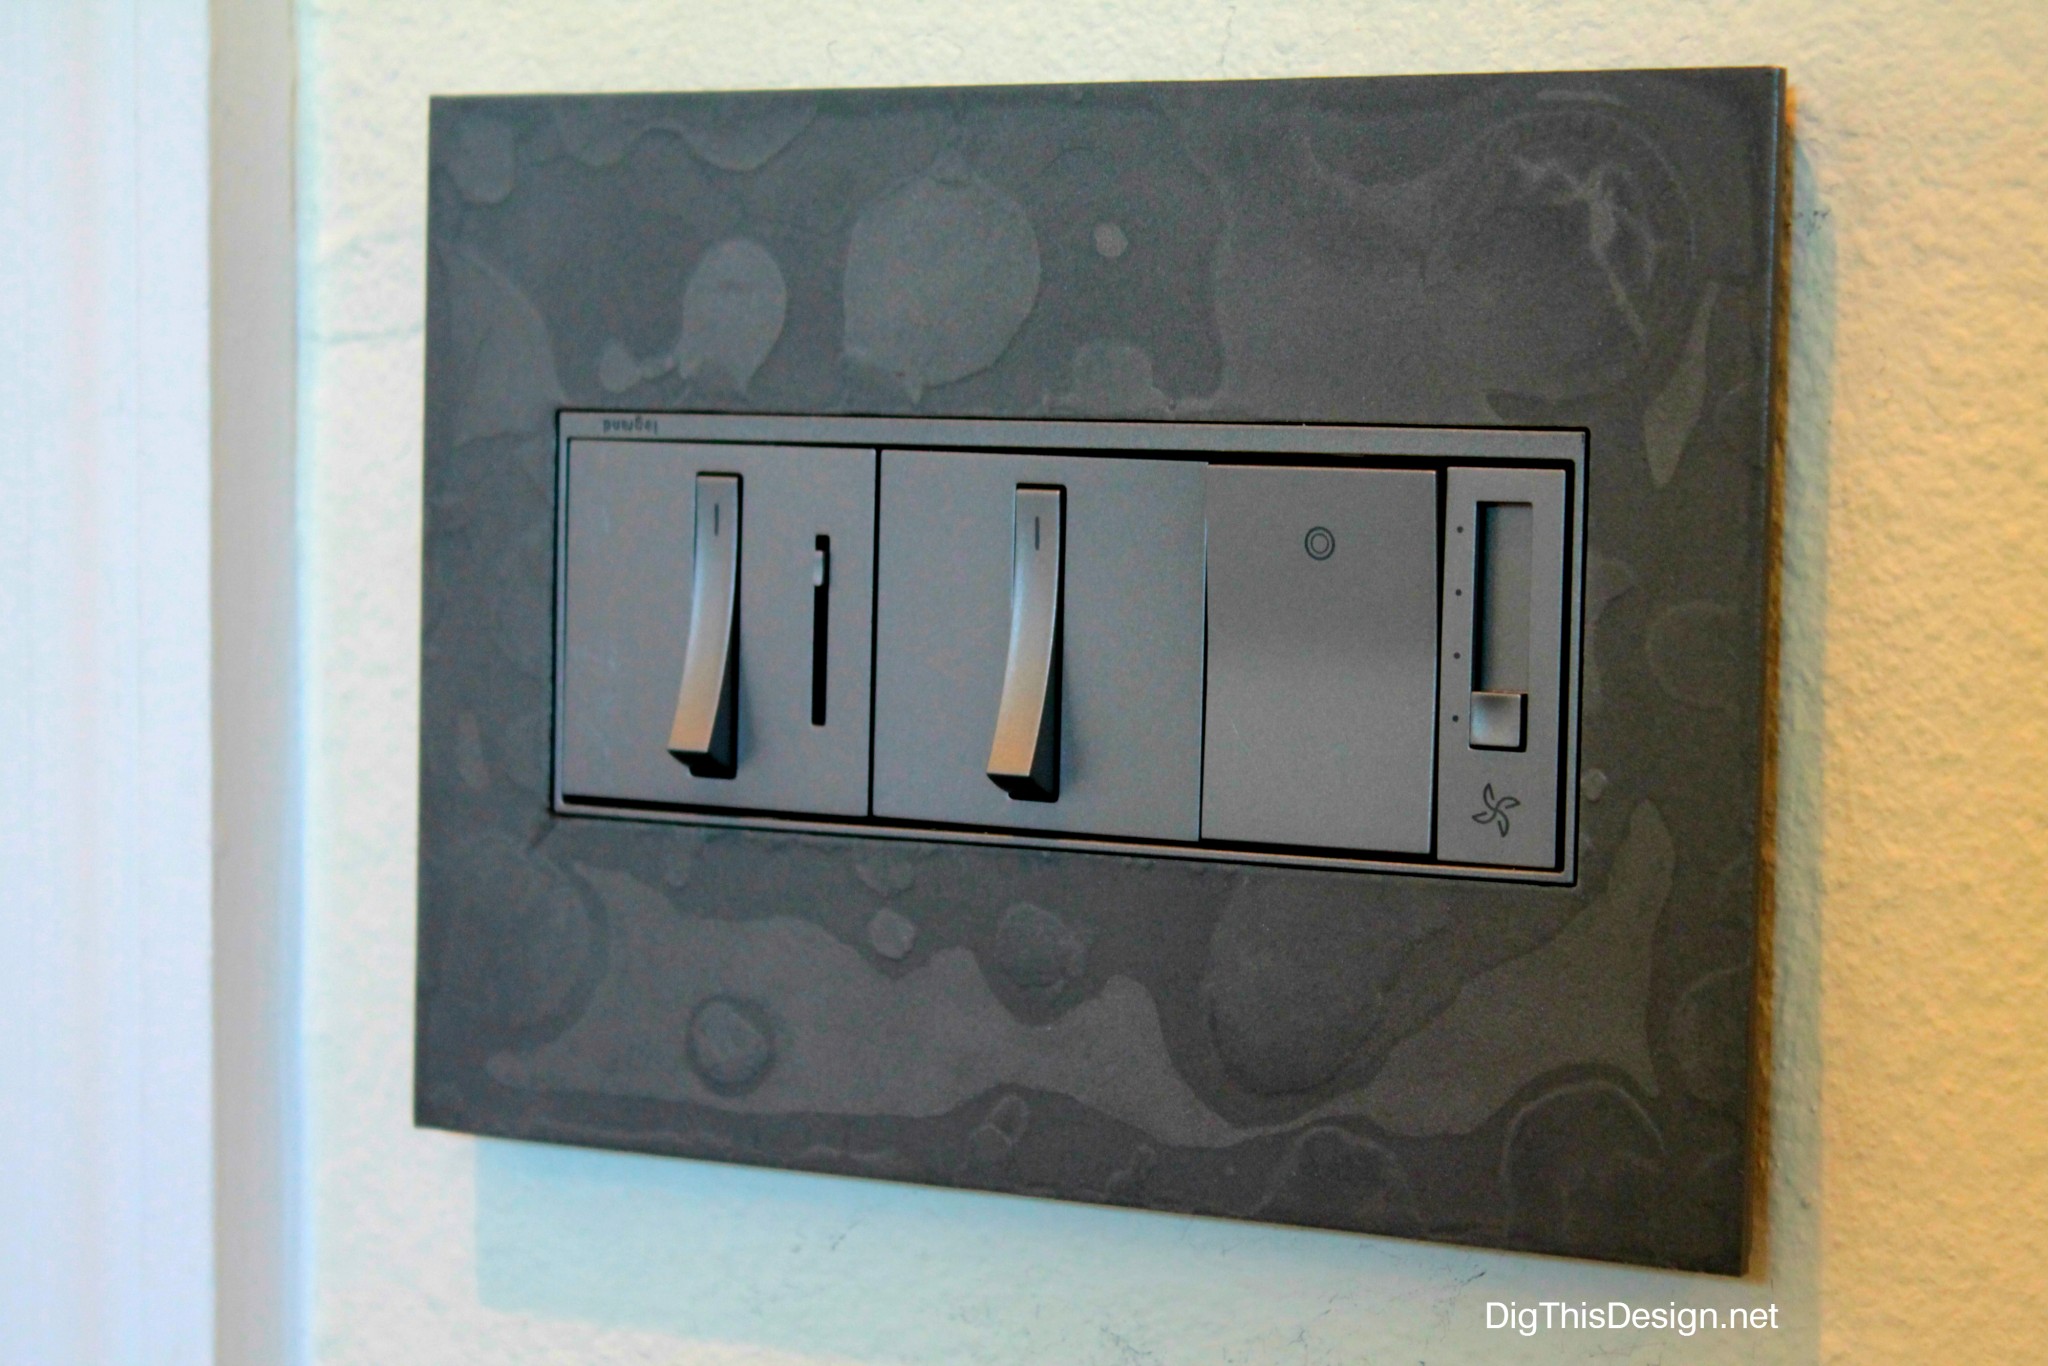 Decorative switch plate from Legrand & Hubbardton Forge in Burnished Steel design, interior design, decor, decorative outlet plate